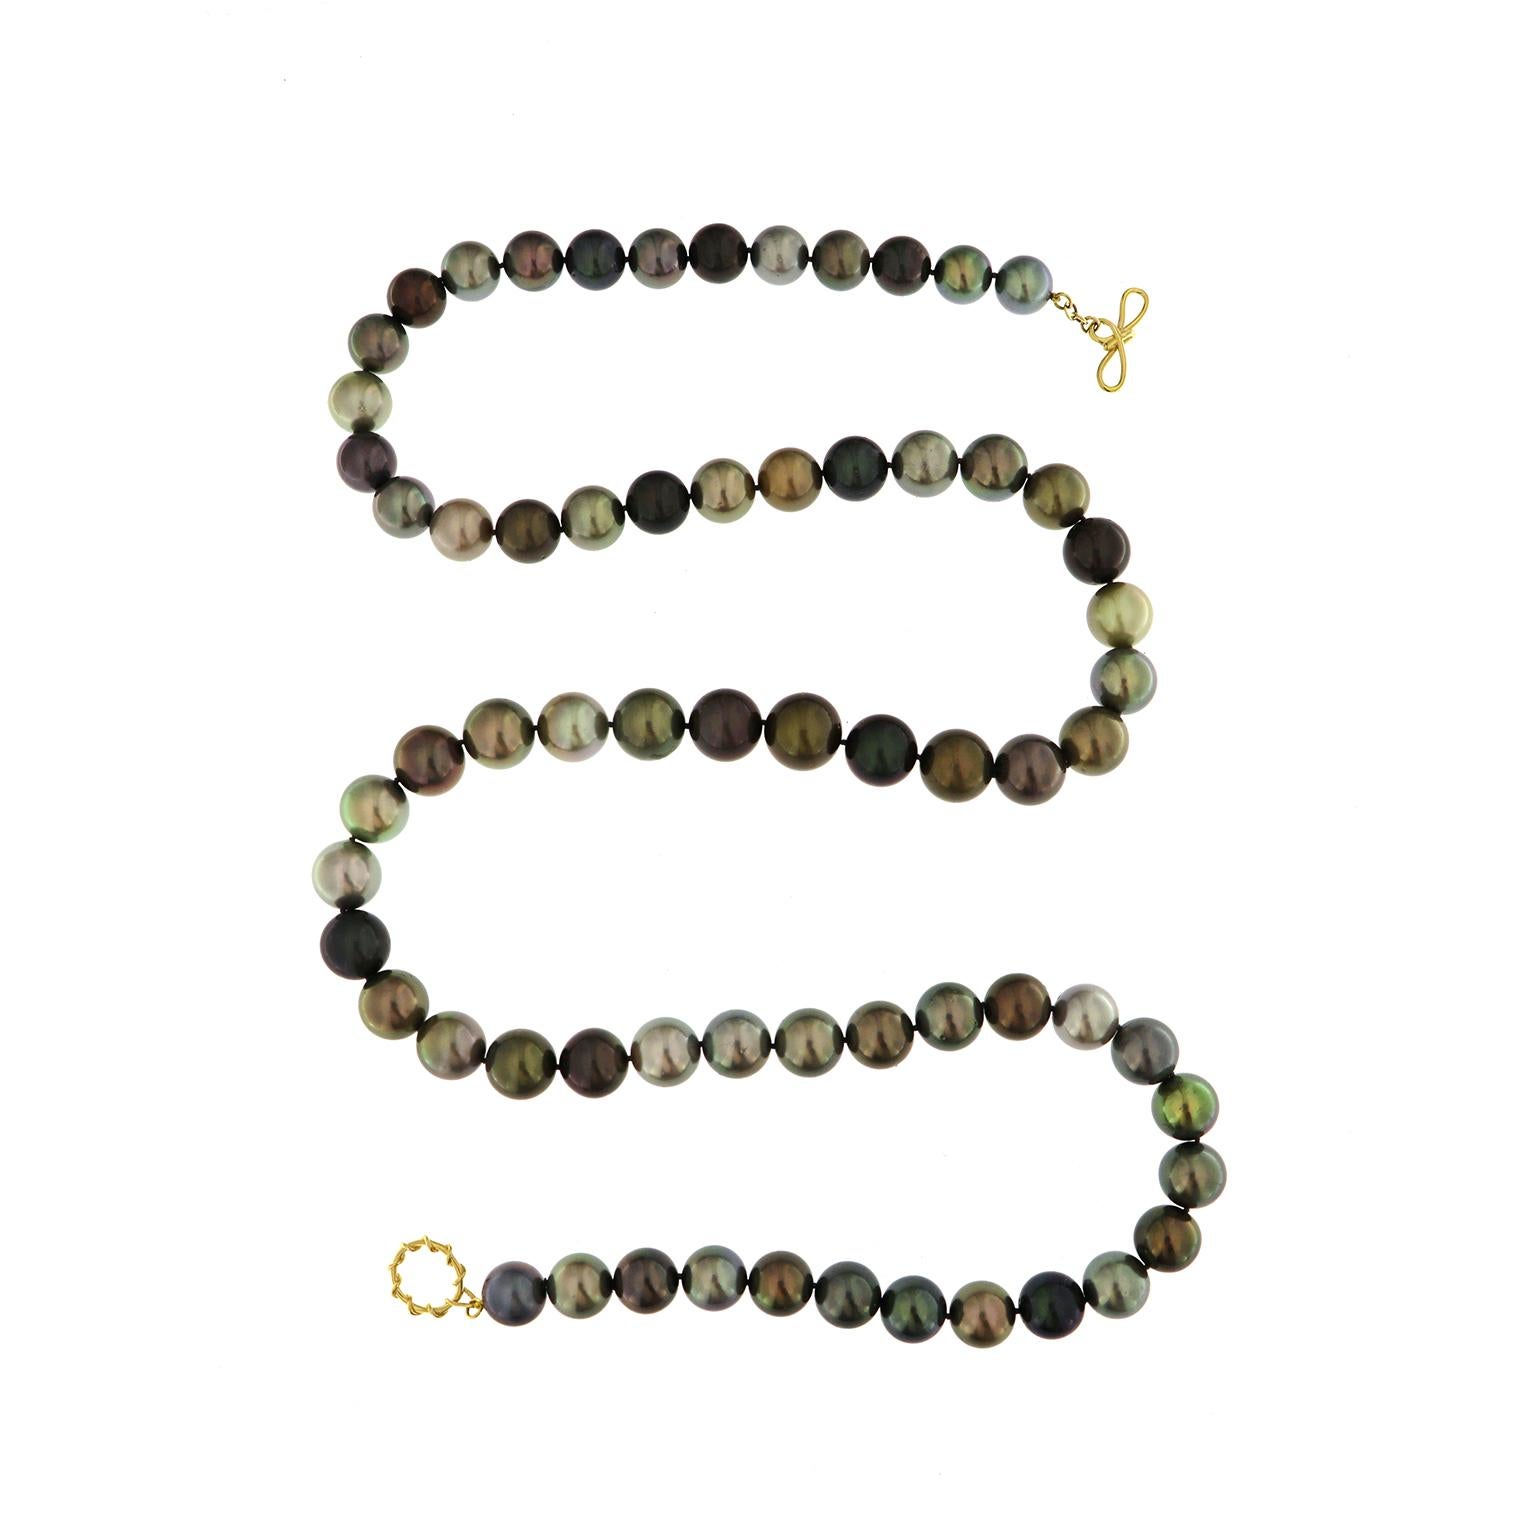 Valentin Magro 18 Karat Yellow Gold Pearl Necklace showcases shades of grey. Sixty-six pearls, 14mm by 12mm each, fill the strand. While they match in hue, shape, and luster, their colors show great variety. Some are lighter and other darker.